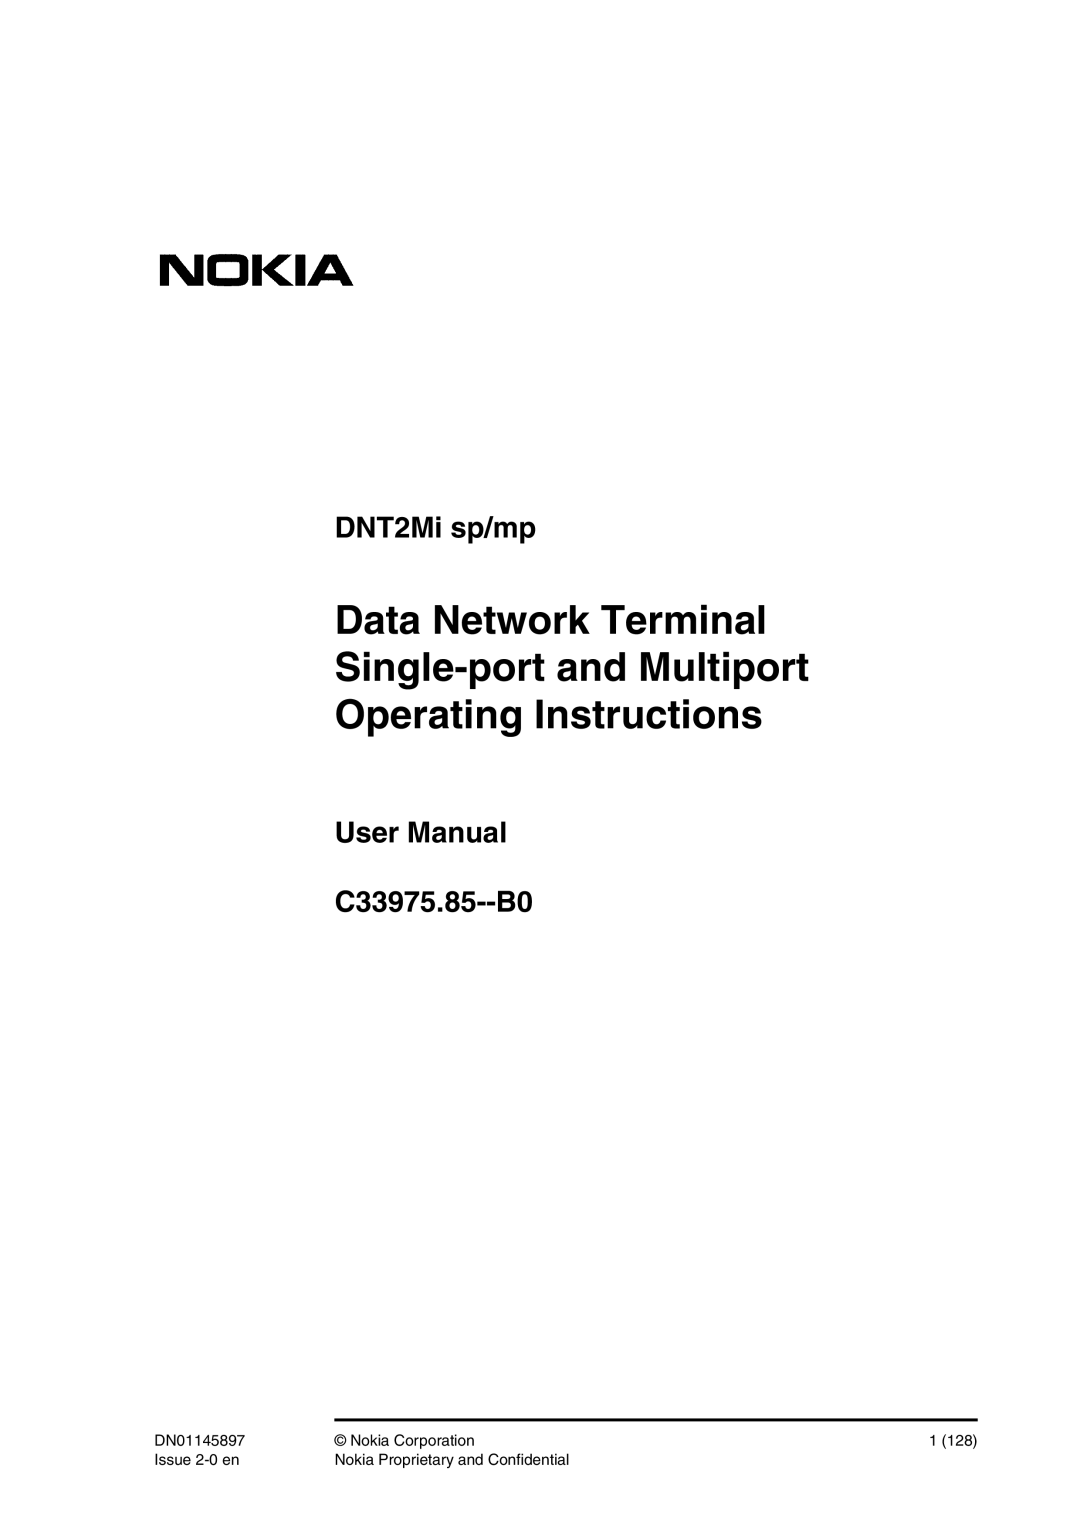 Nokia DNT2Mi sp/mp user manual User Manual C33975.85--B0, Data Network Terminal Single-port and Multiport, DN01145897 